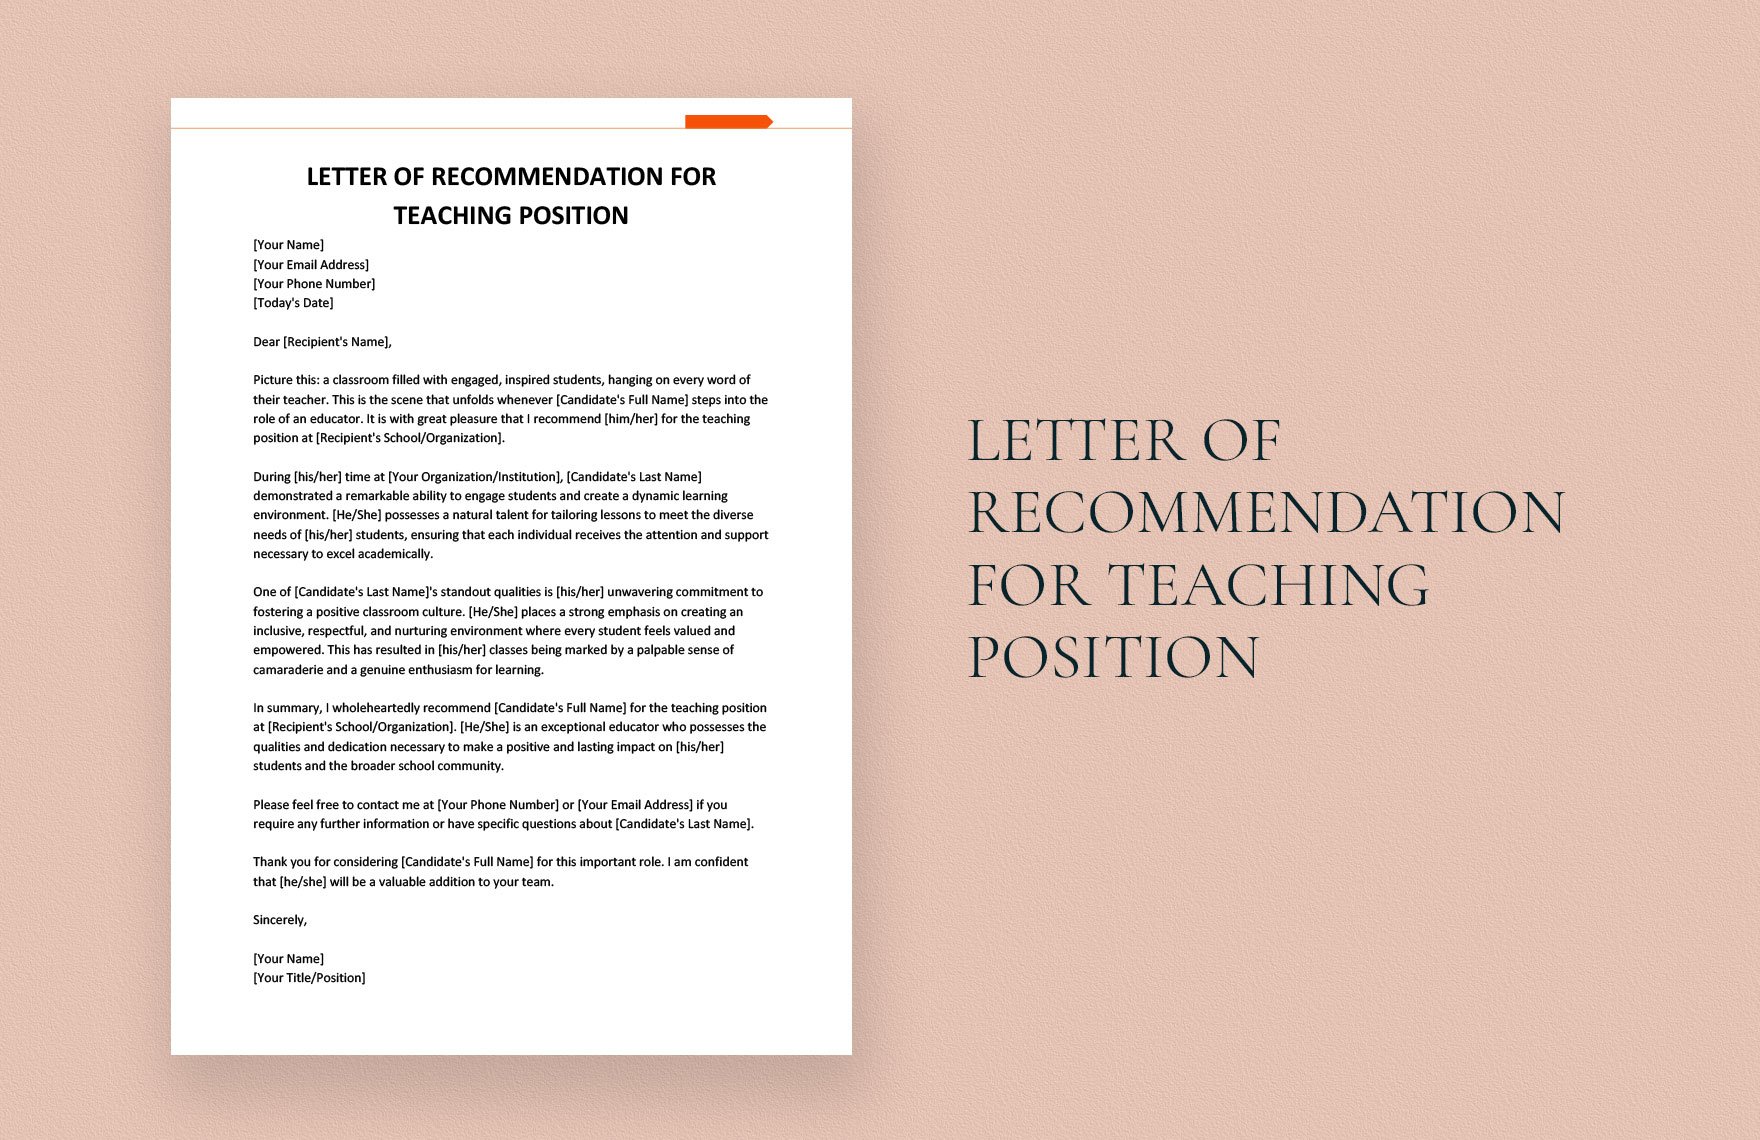 Letter of Recommendation for Teaching Position